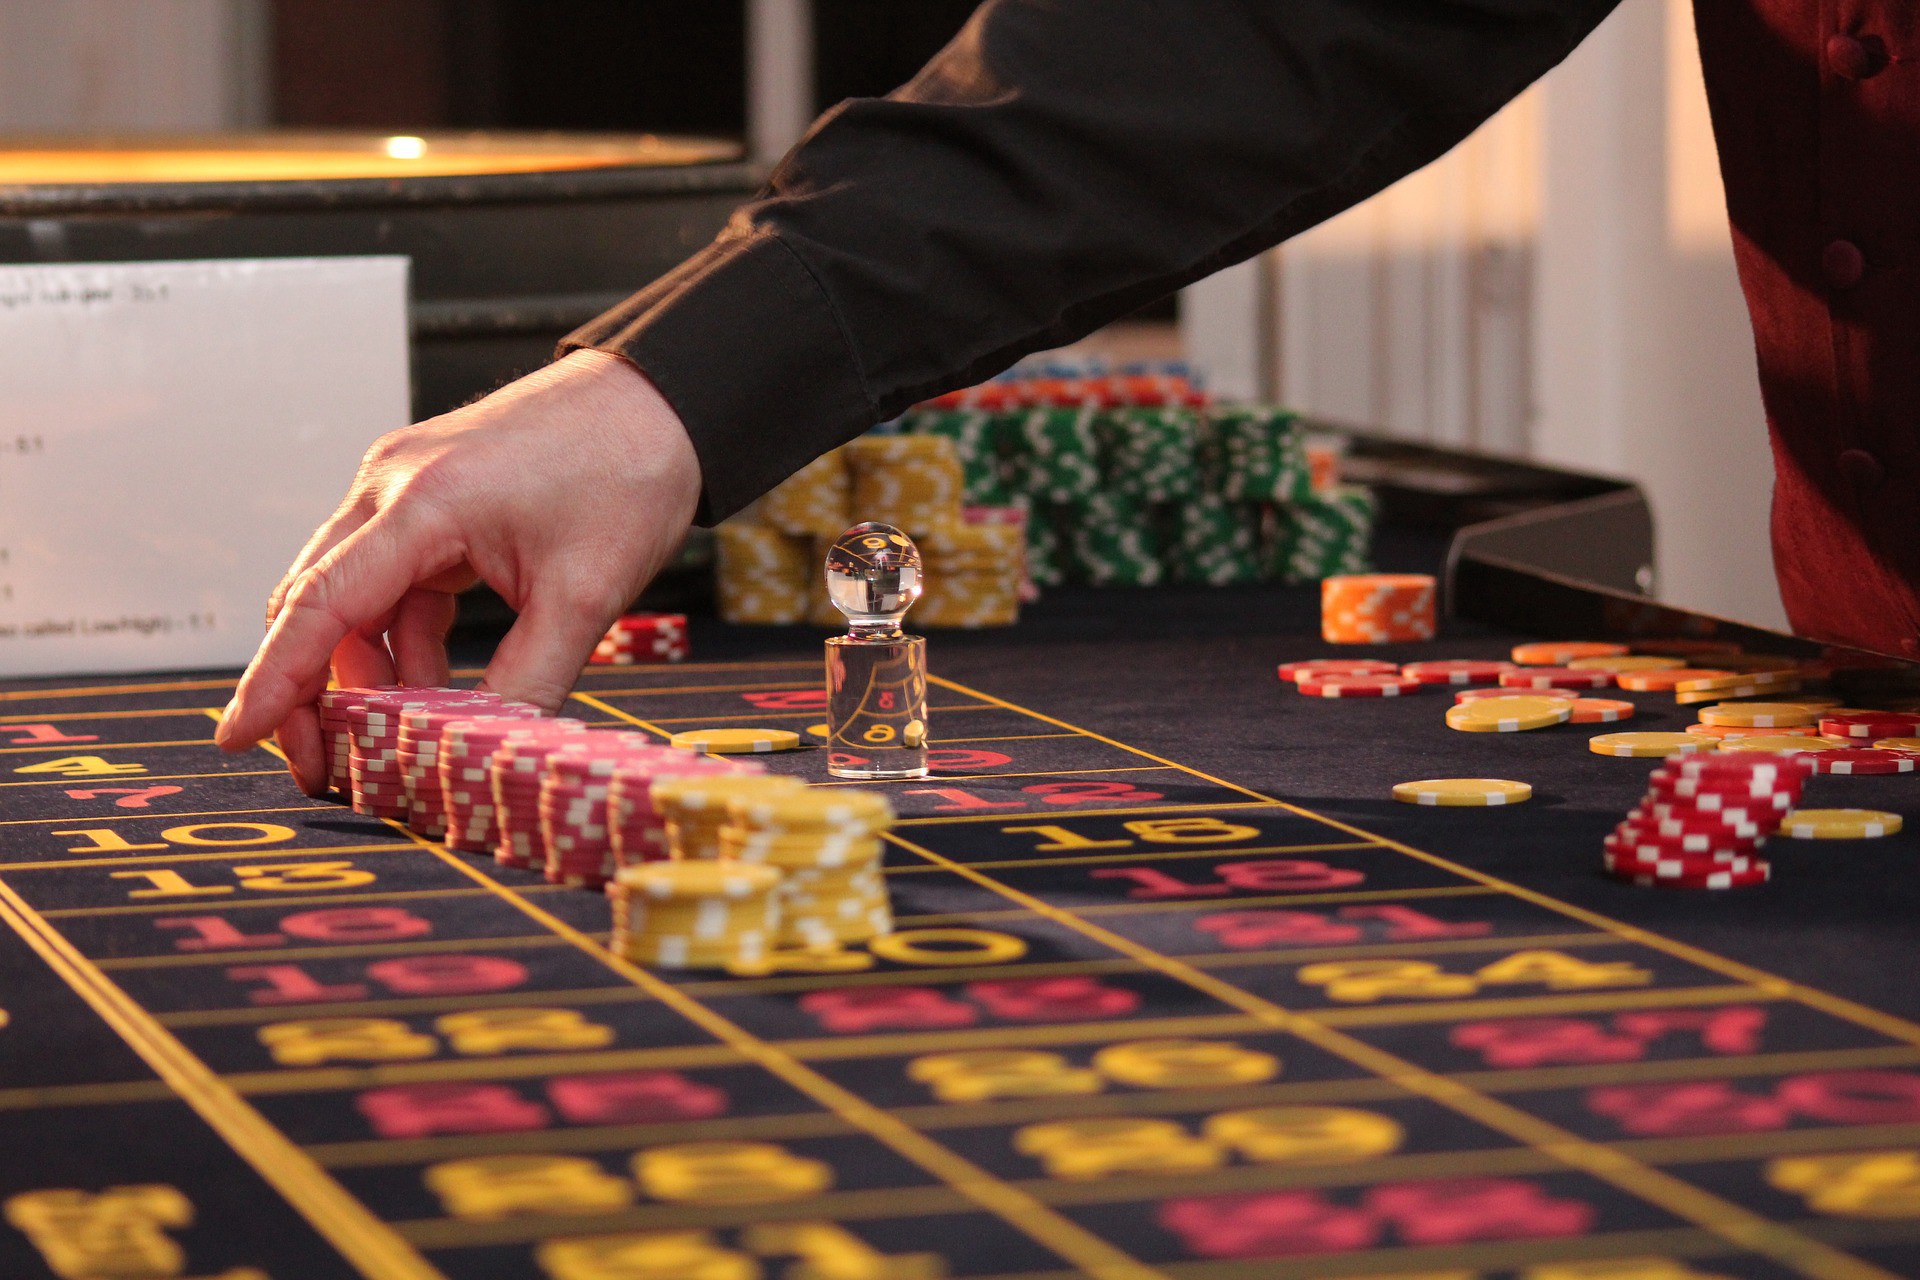 Bitcoin Casinos Have Changed Online Betting Forever